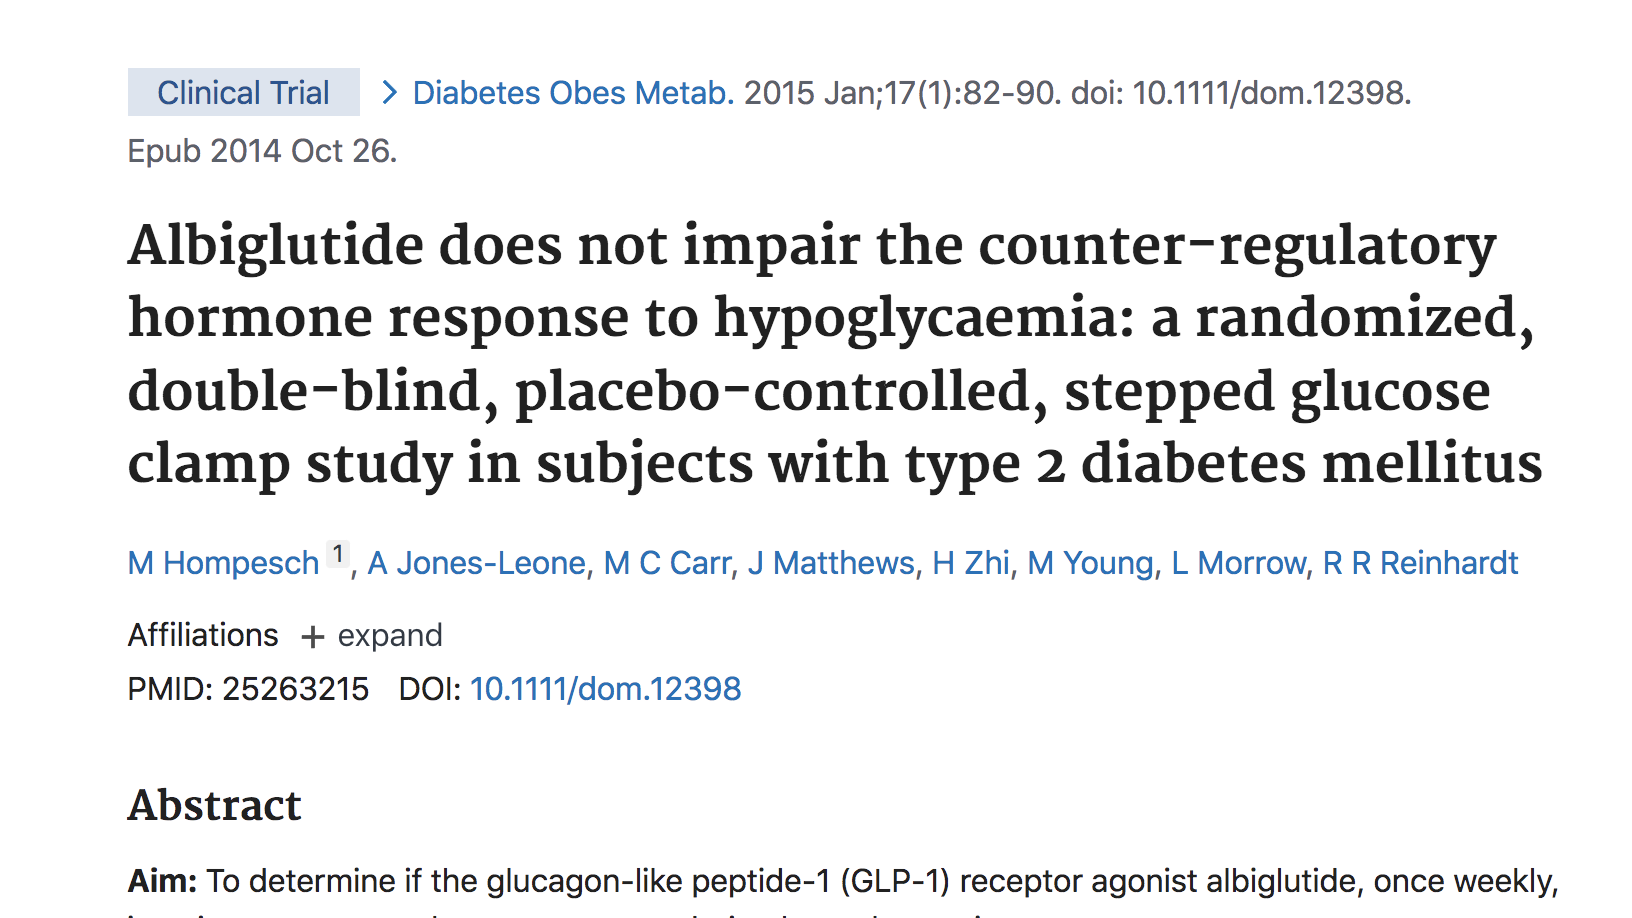 Albiglutide does not impair the counter-regulatory hormone response to hypoglycaemia: a randomized, double-blind, placebo-controlled, stepped glucose clamp study in subjects with type 2 thumbnail